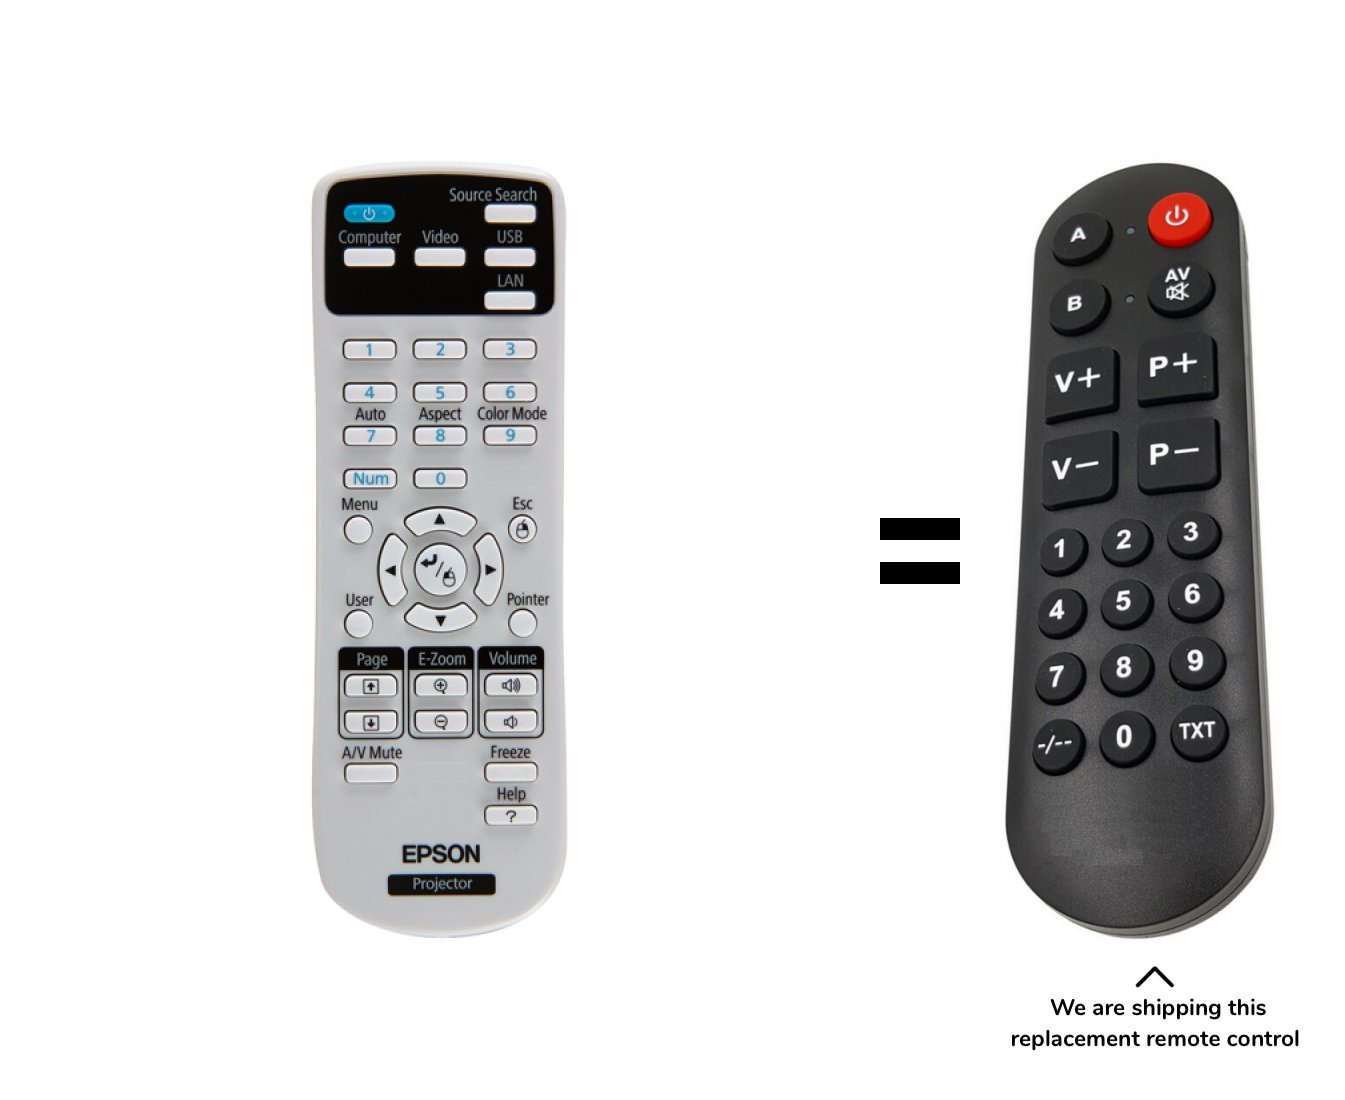 Epson EH-TW490, EH-TW410 remote control for seniors